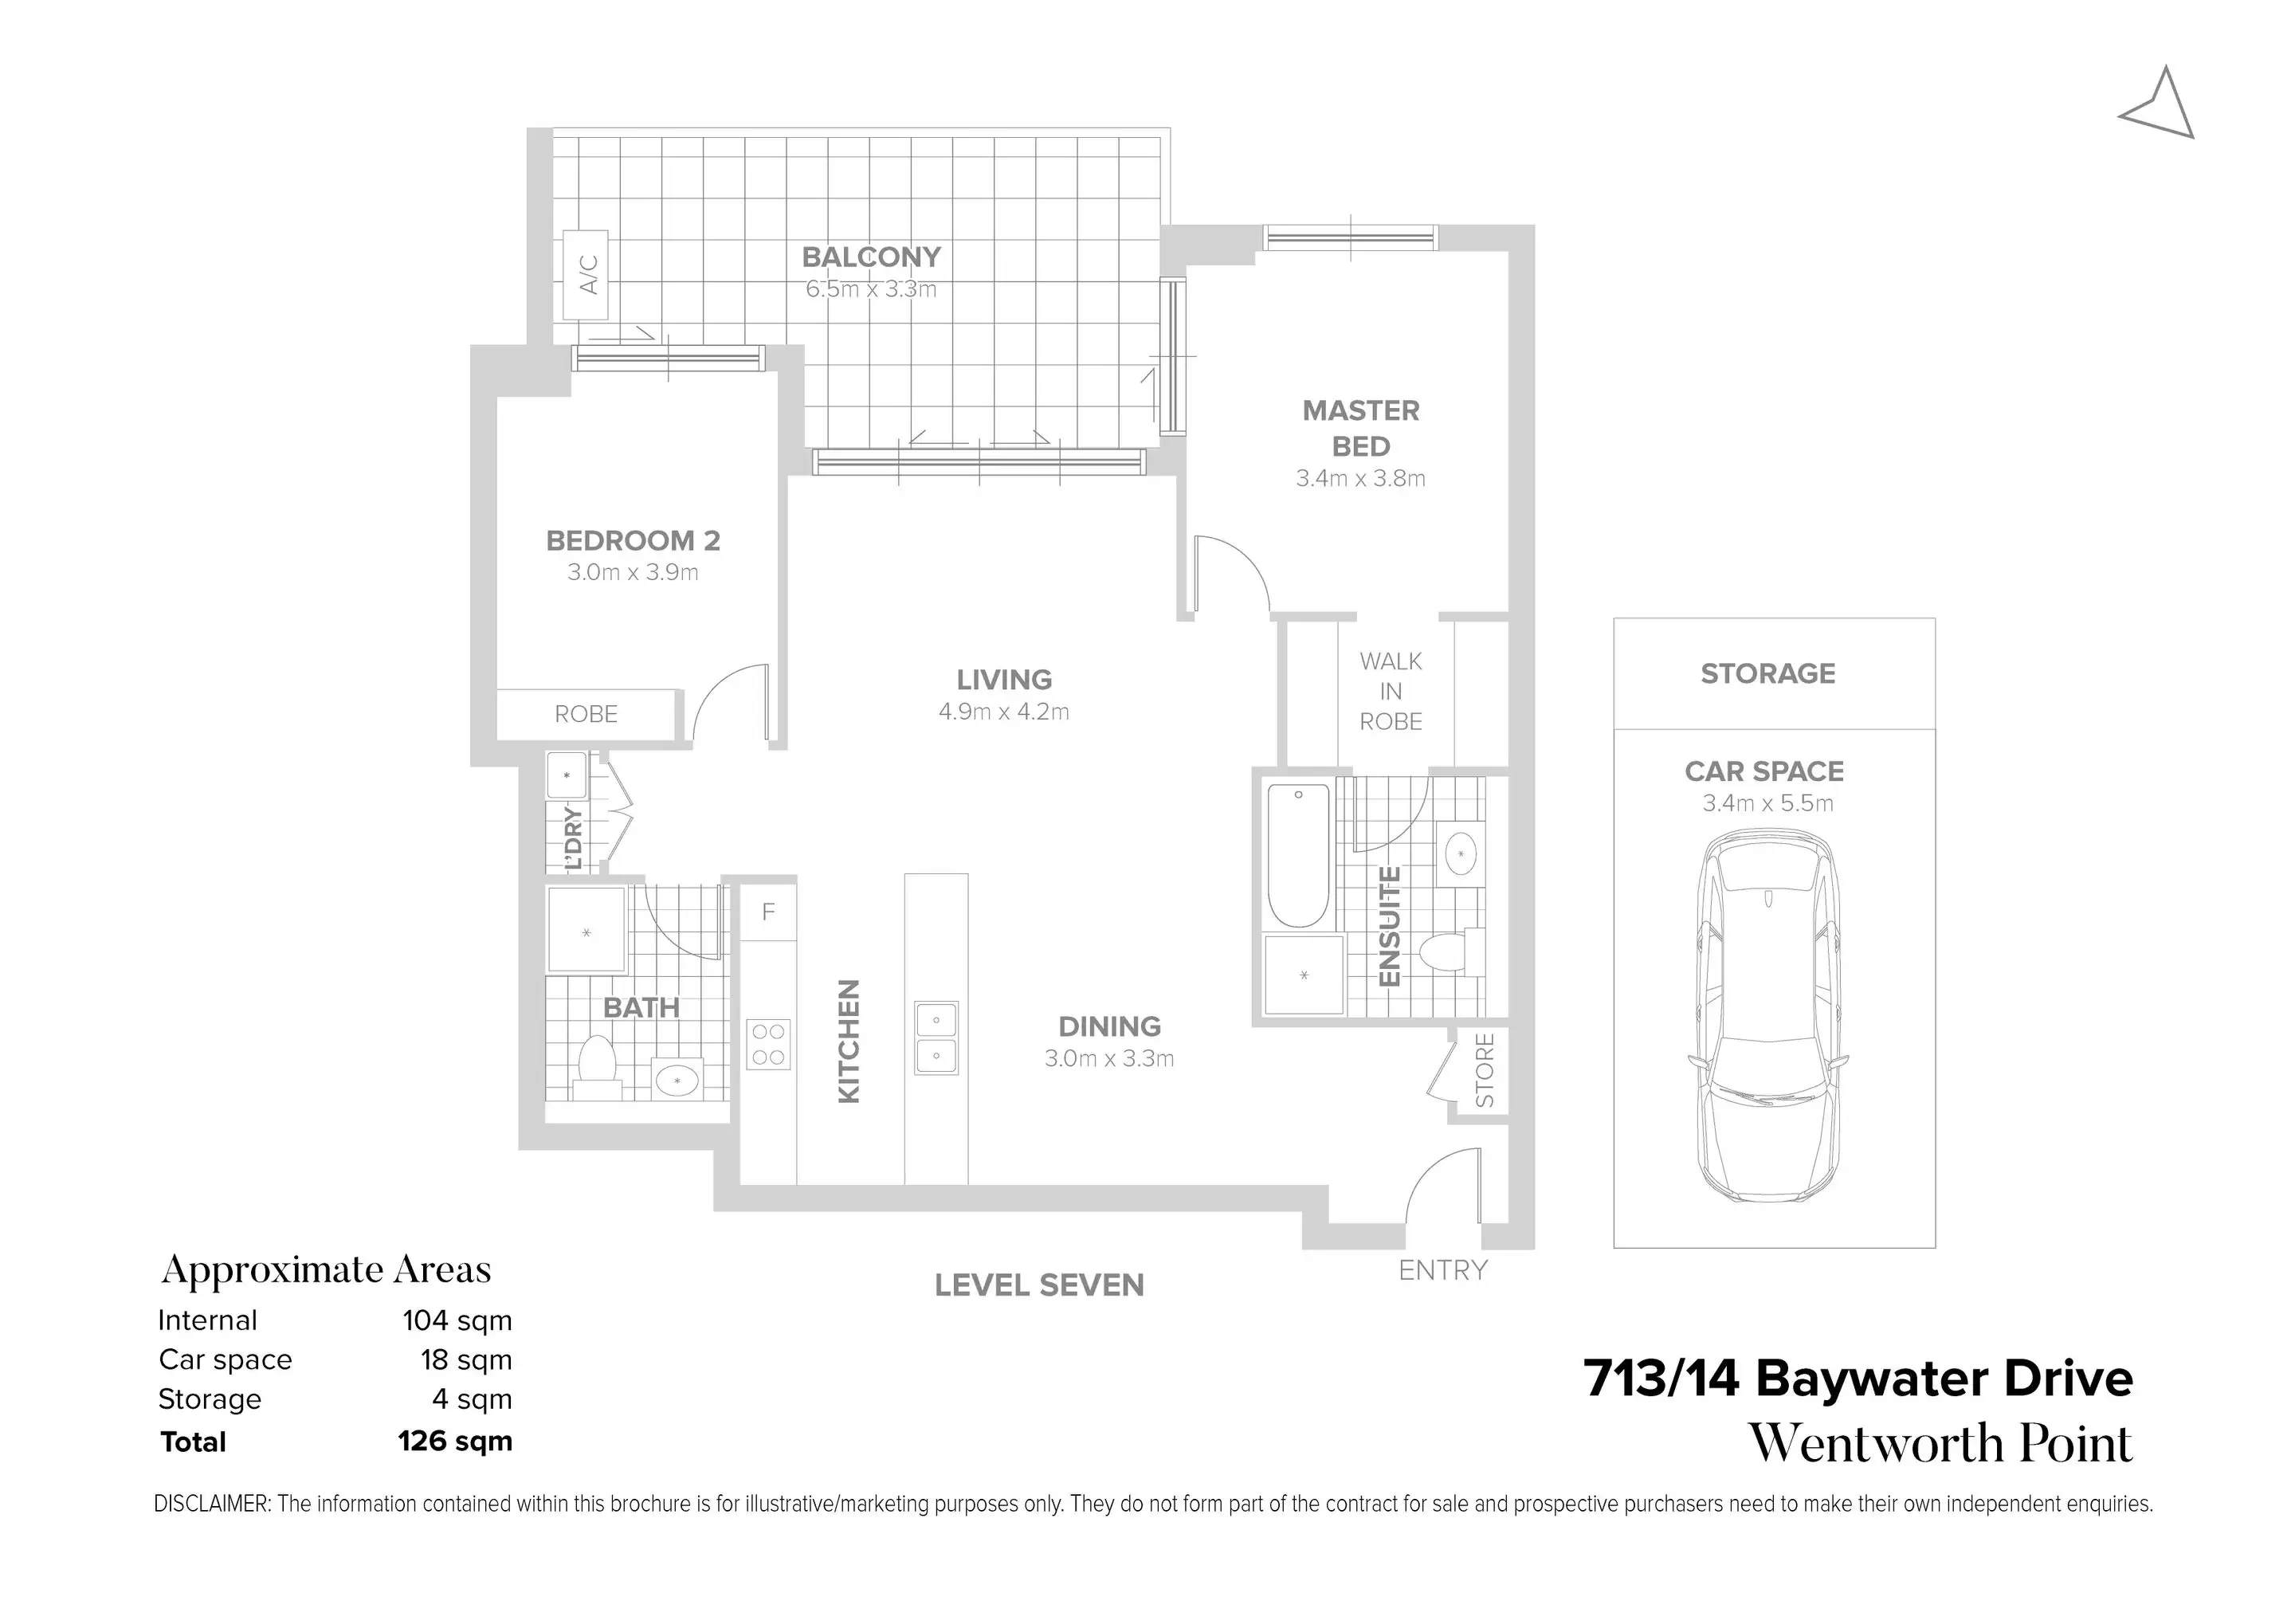 713/14 Baywater Drive, Wentworth Point Sold by Chidiac Realty - floorplan